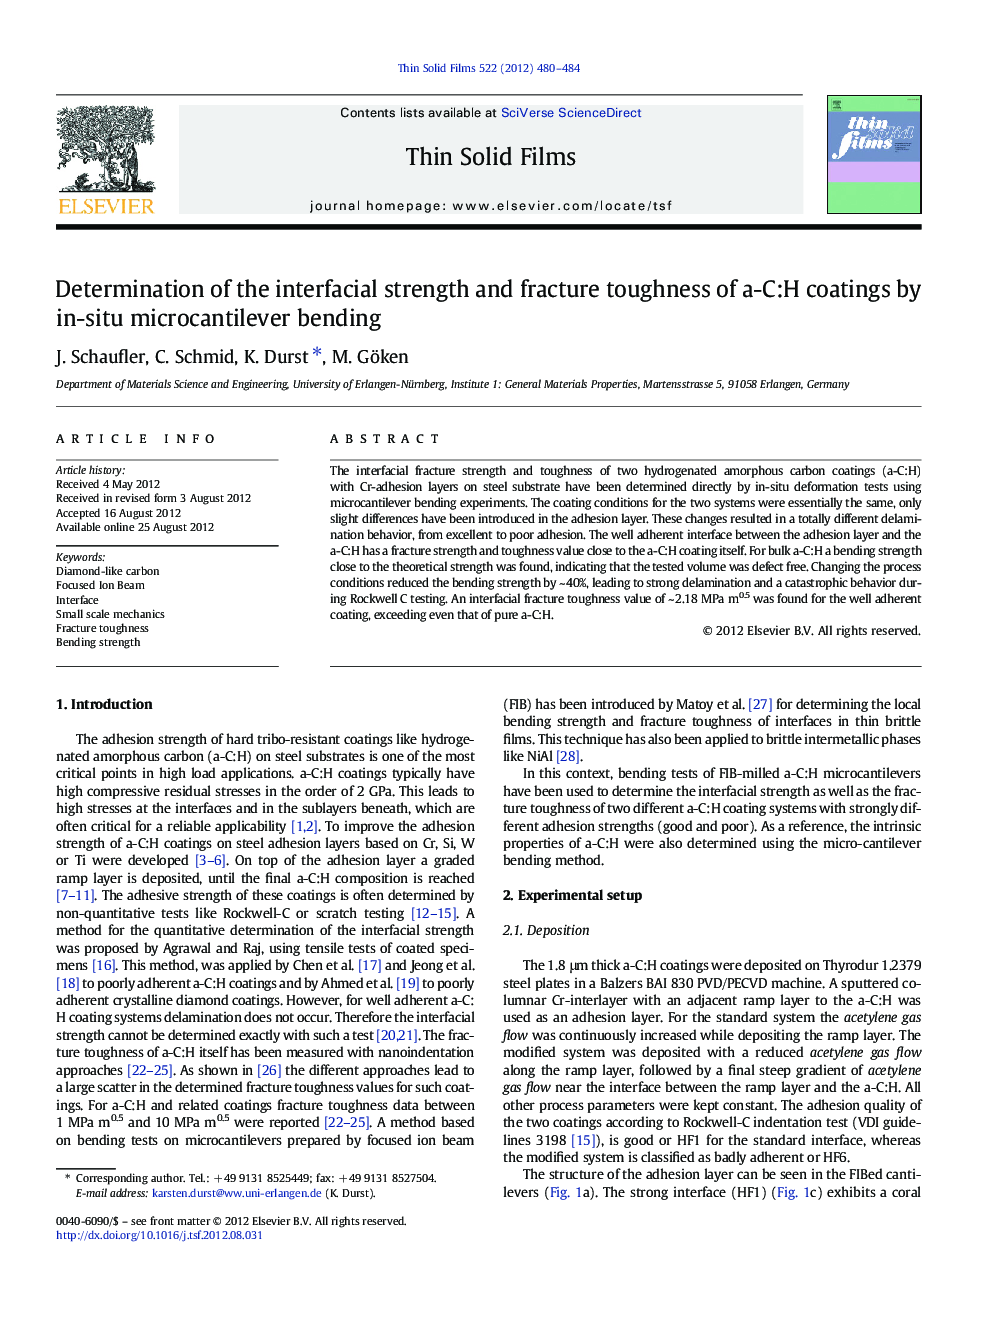 Determination of the interfacial strength and fracture toughness of a-C:H coatings by in-situ microcantilever bending